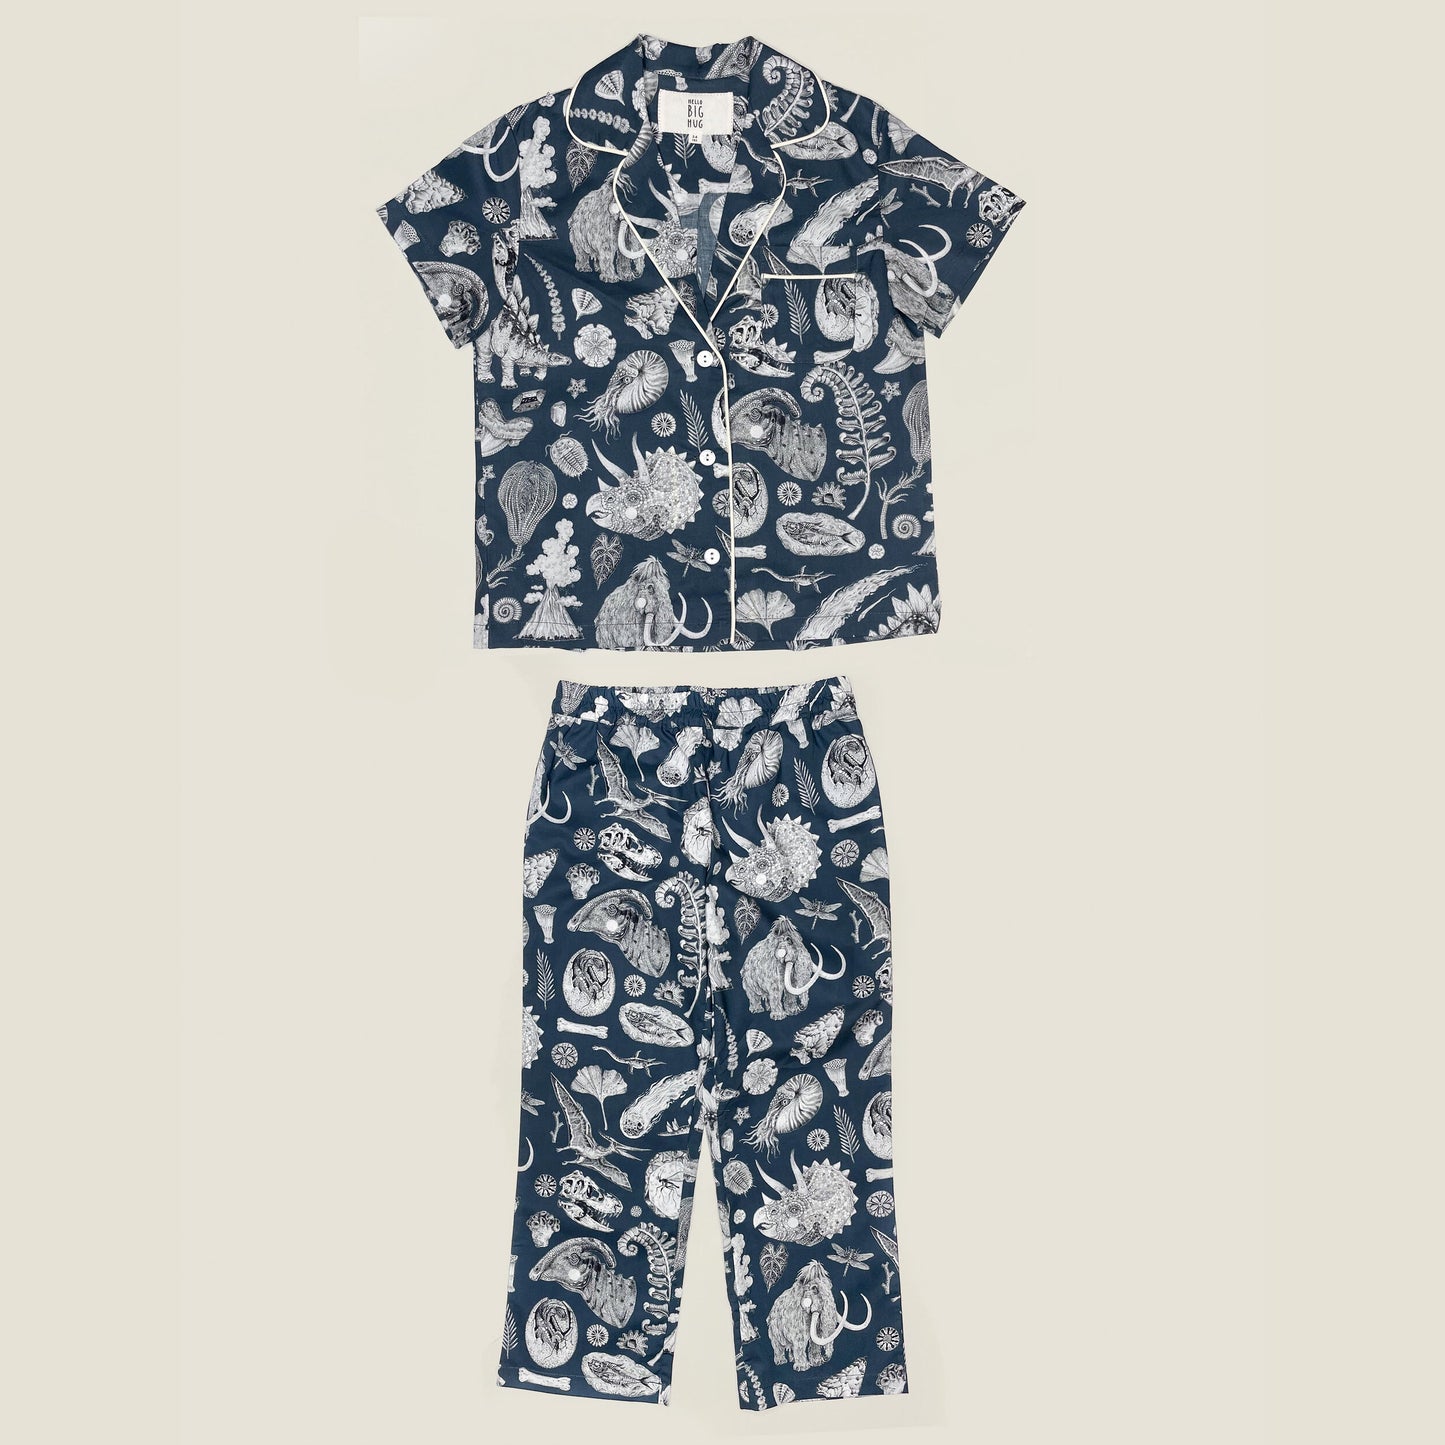 Inspired by the beautiful prehistoric illustration by Tattoo-Artist Suflanda this Children Pyjama Set guarantes sweet dreams. The tiny details on sleeve add a tailored hint to the classic shape. The long pants feature an elasticated waist and are easy to wear on extraordinary adventures and comfy to roll in bed